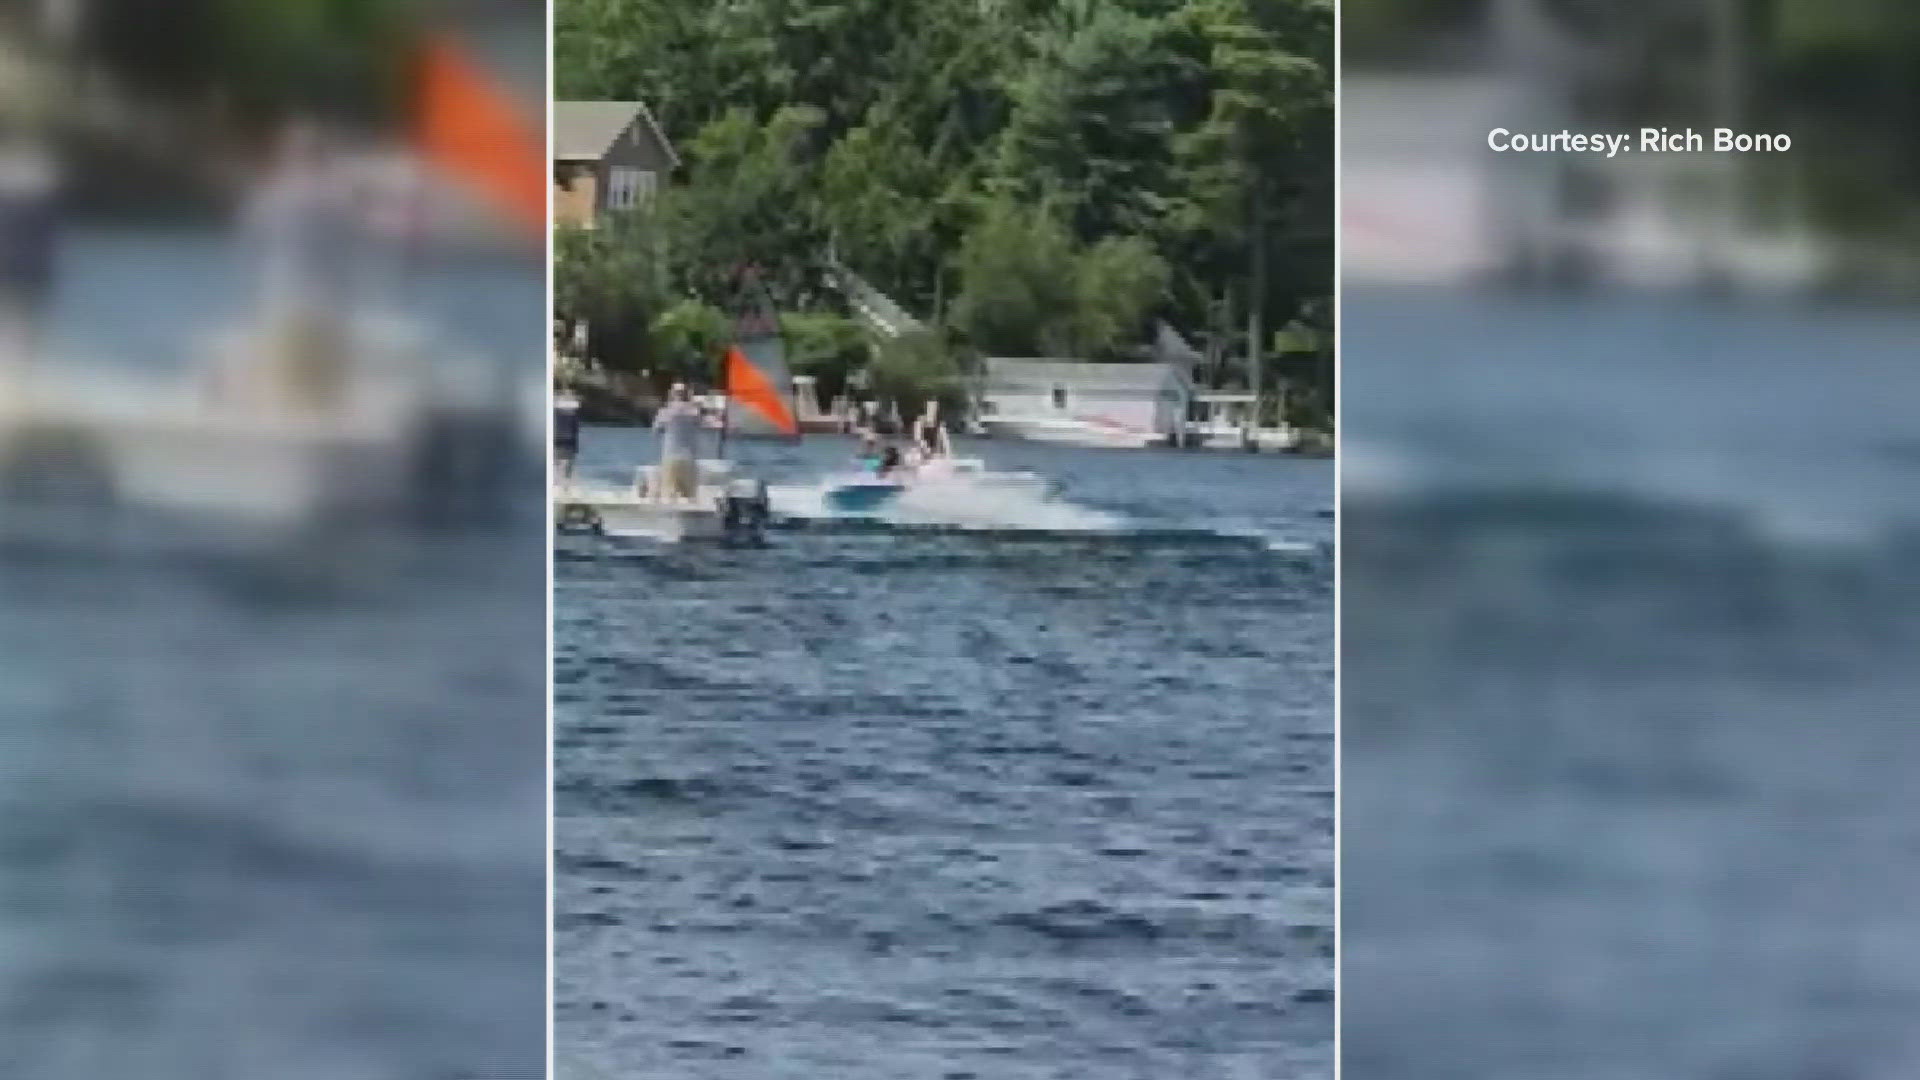 A dramatic boat recovery on Lake Winnipesaukee was caught on camera Wednesday when the operator was knocked off and the boat continued to spin. (Courtesy: Rich Bono)